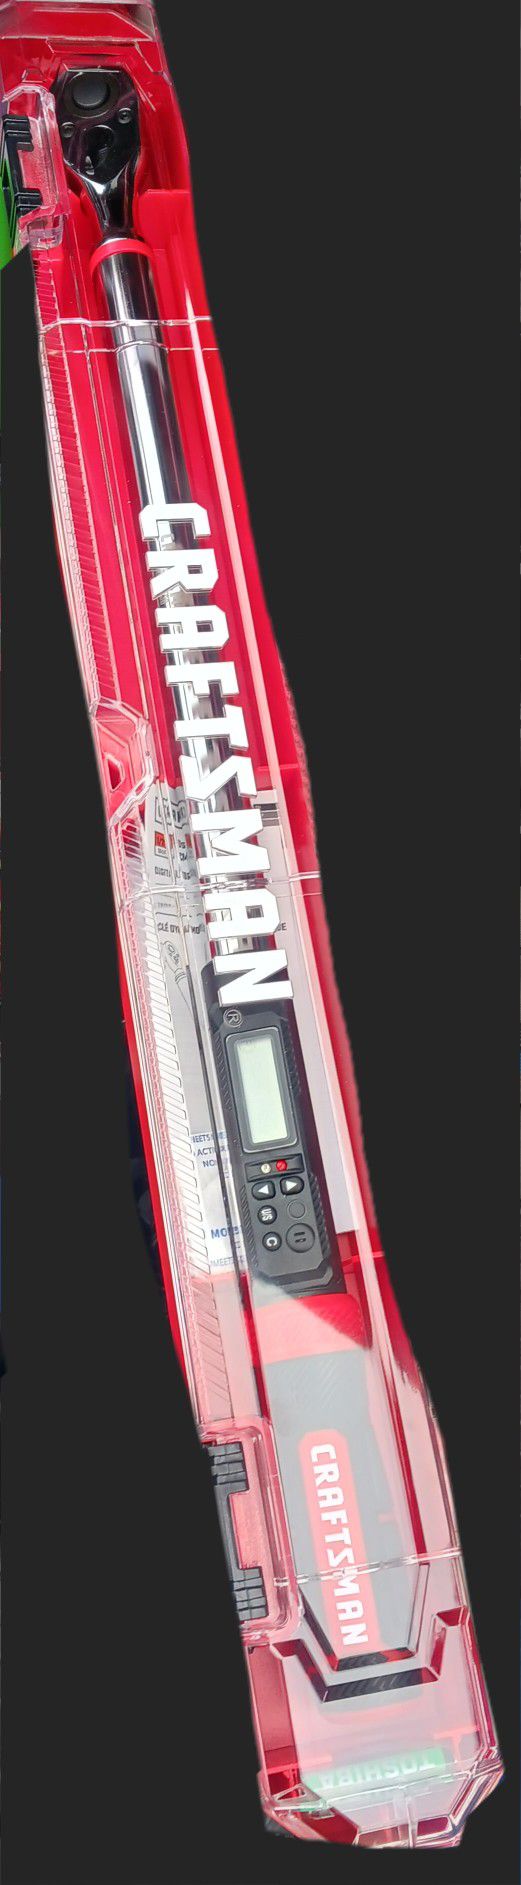 CRAFTSMAN 1/2-in Drive Digital Torque Wrench (50-ft lb to 250-ft lb)